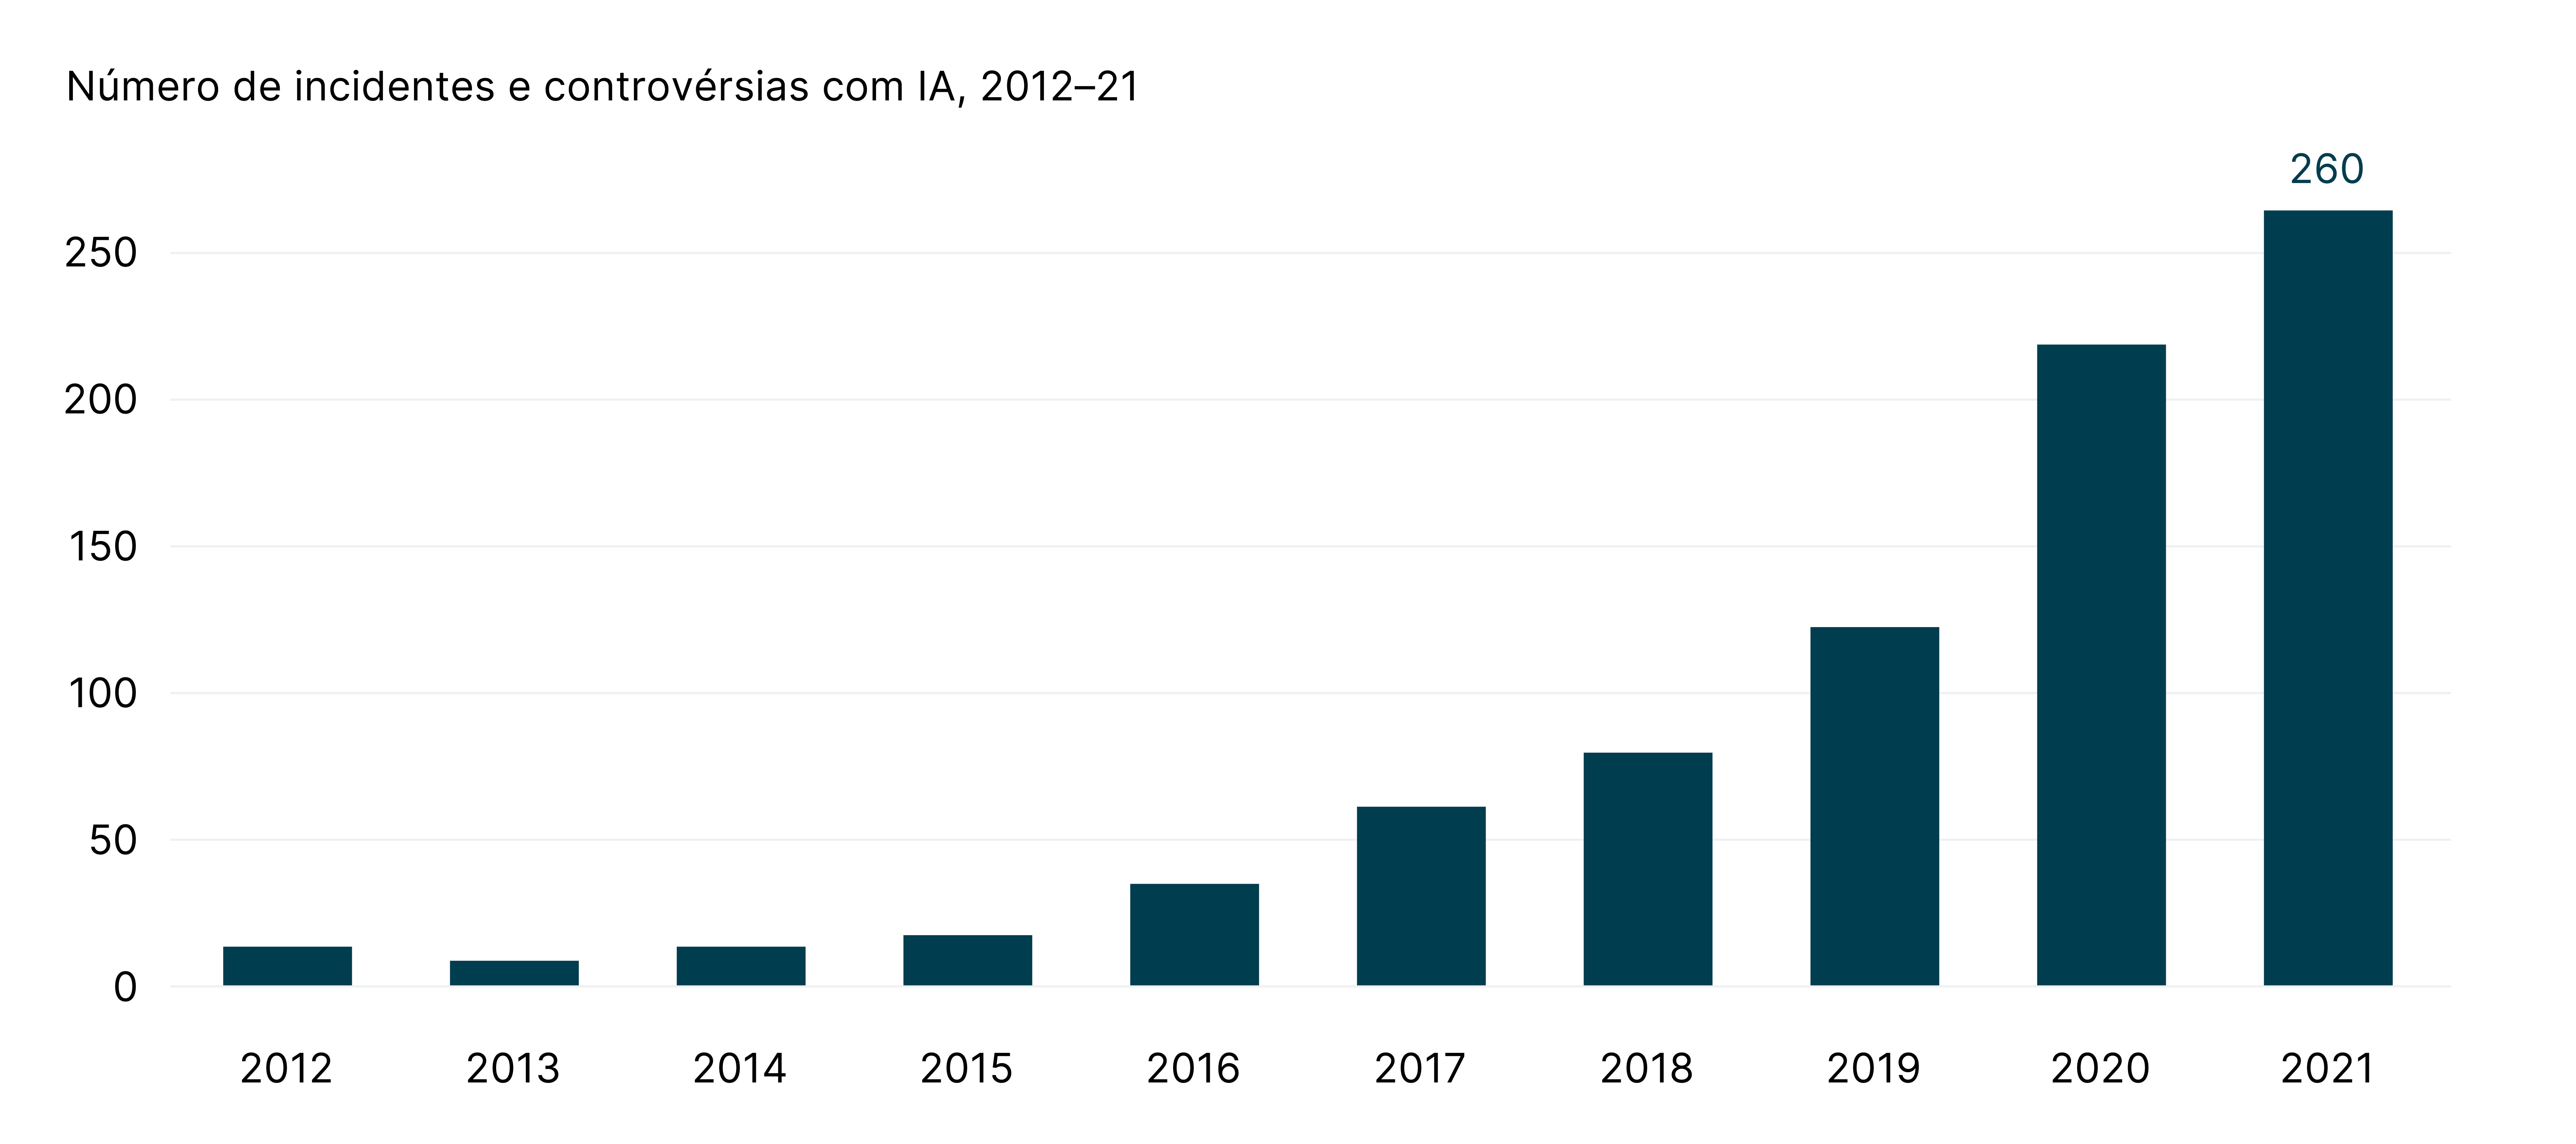 Bar graph showing that The number of newly reported AI incidents and controversies in the AIAAIC database was 26 times greater in 2021 than in 2012